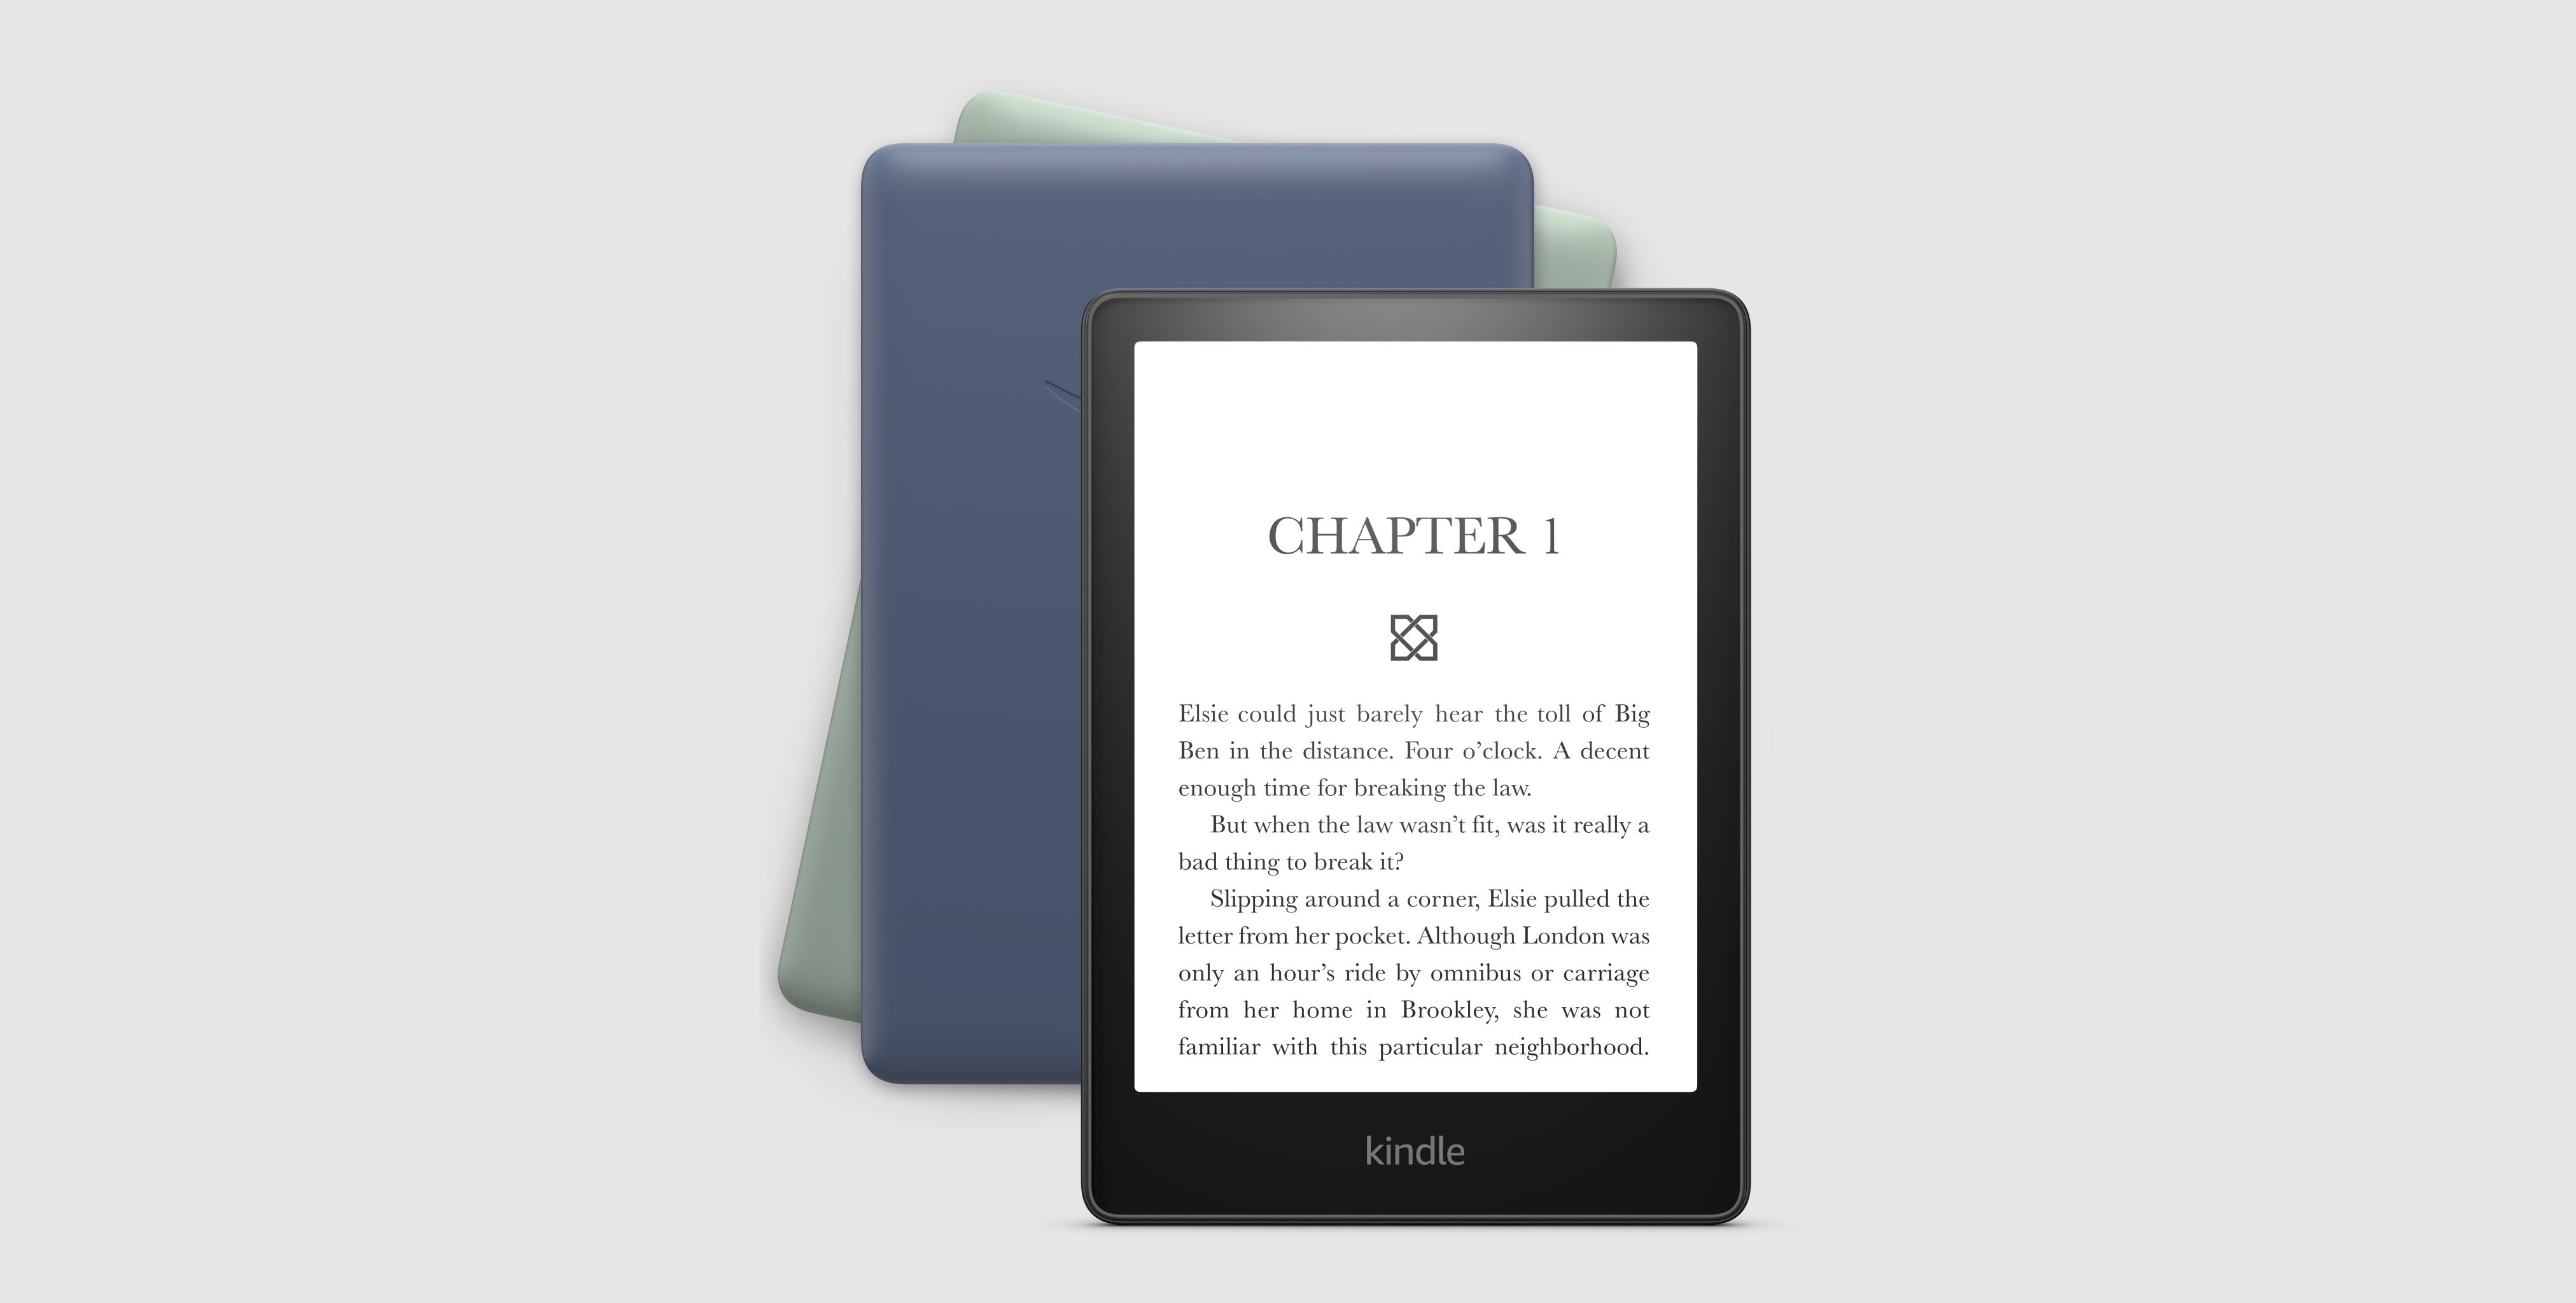 New Denim and Agave Green colors for Kindle Paperwhite (ed)